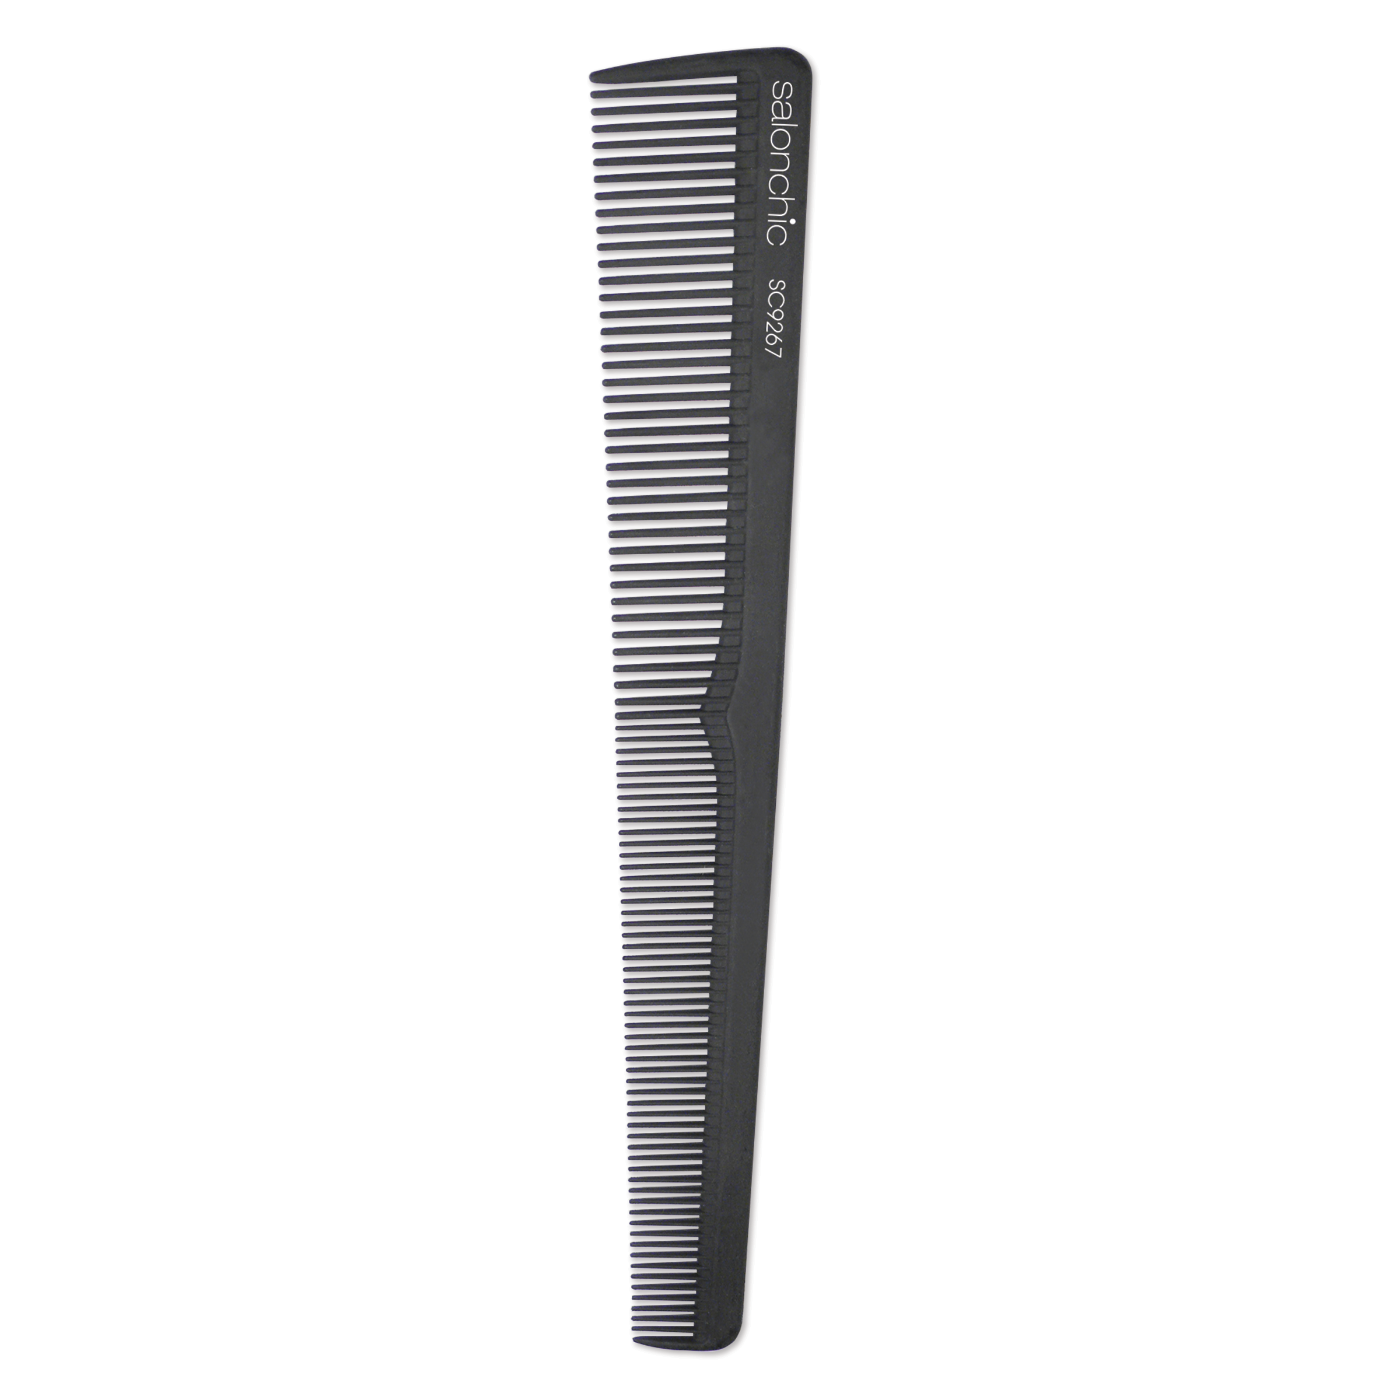 Carbon Barber Styling Comb - 7"